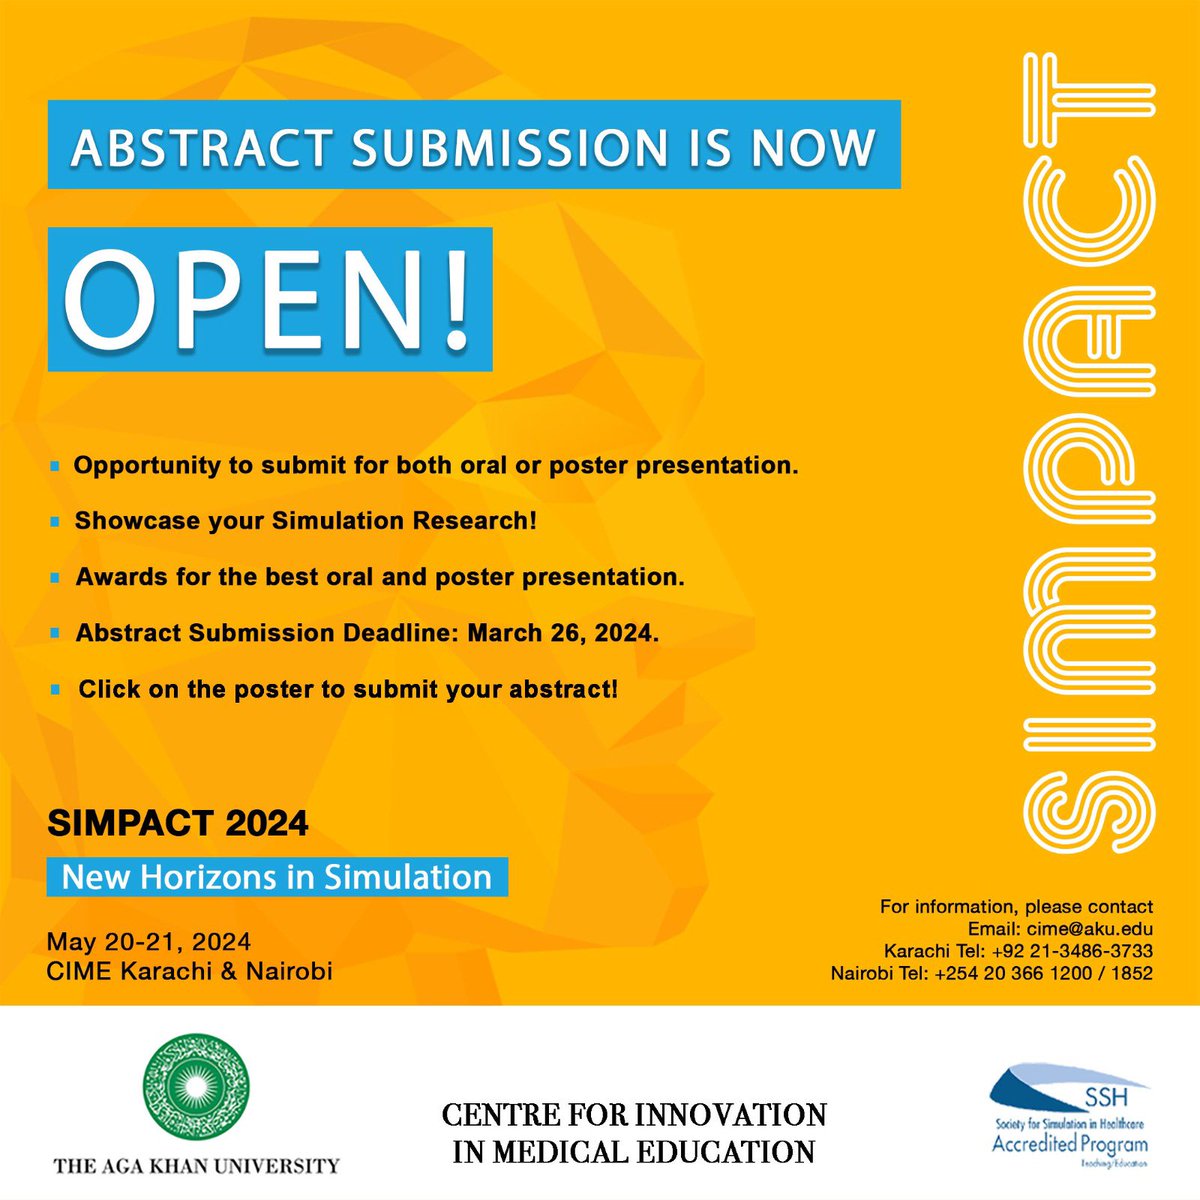 SIMPACT will be the first Simulation conference of the country hosted jointly by Karachi and Nairobi @CIME @AKUGlobal. Workshops, panel discussions, research presentations and talks by leaders in the field! Let’s make a SIMPACT together! #simpact #MedEd